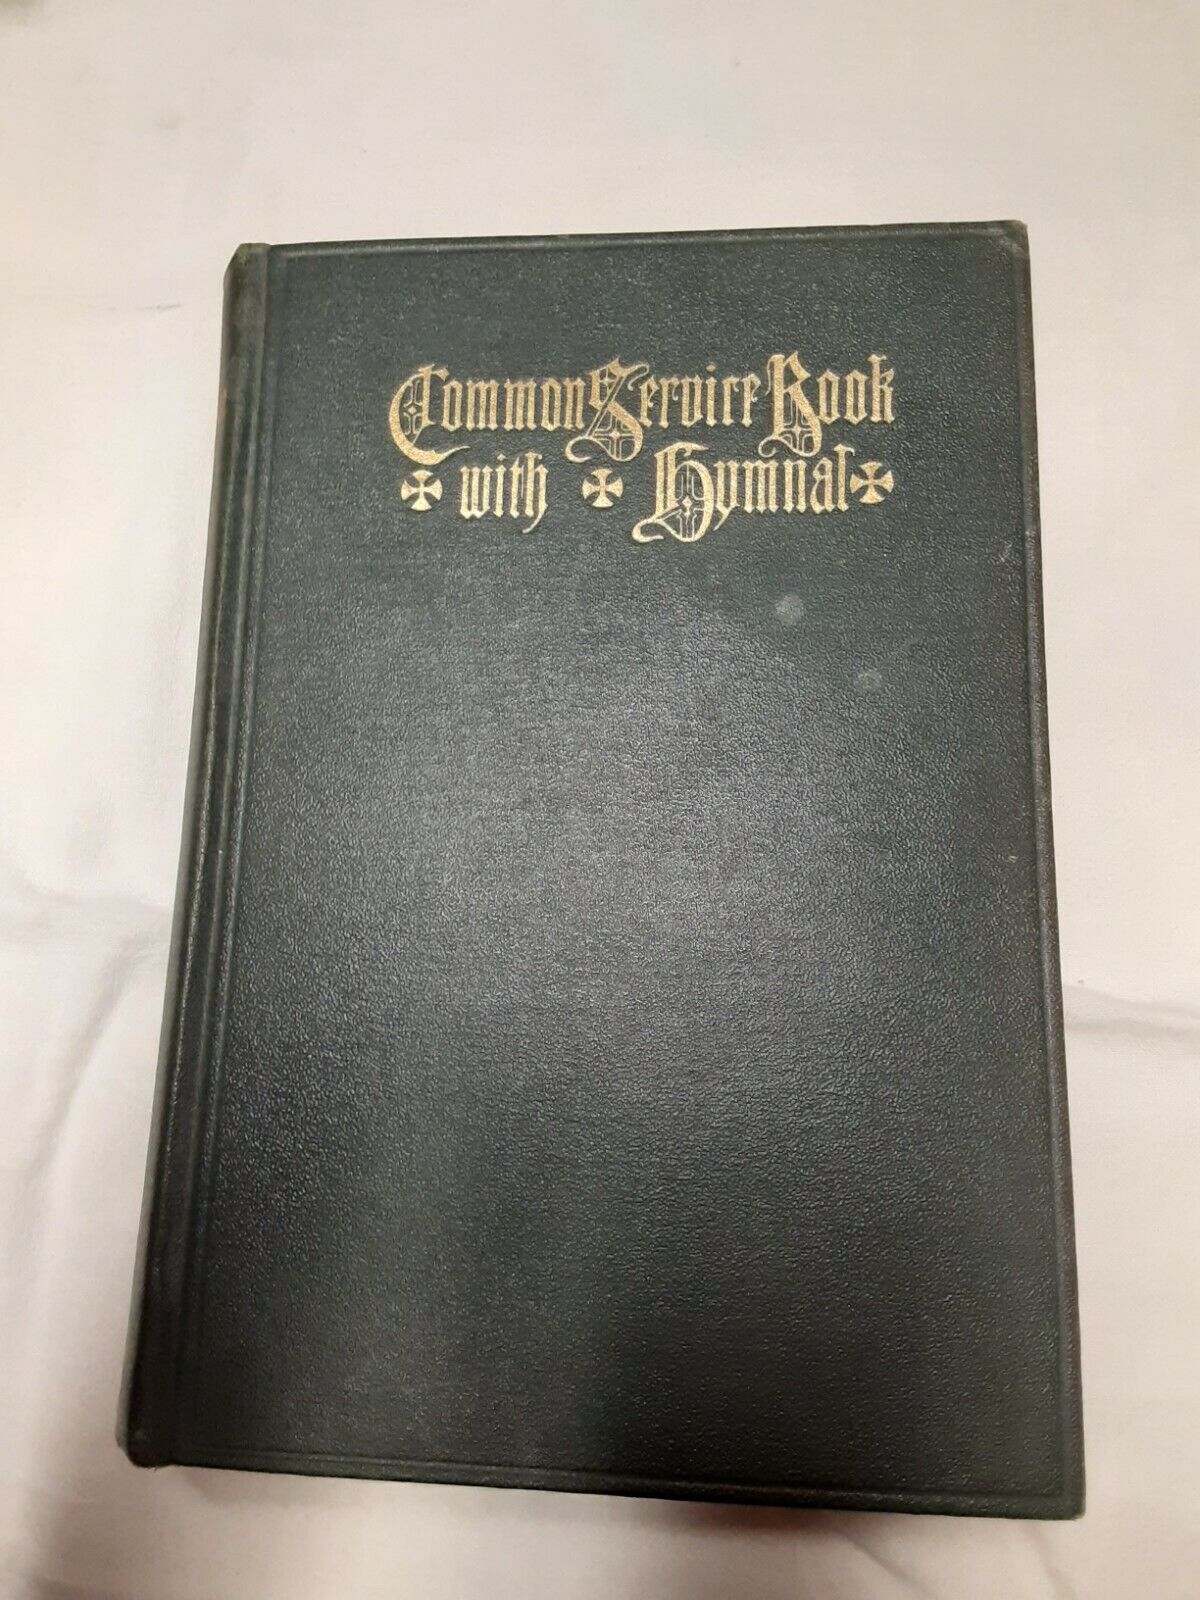 Vintage Common Service Book with Hymnal, Lutheran Church, 578 Hymns, 1918 